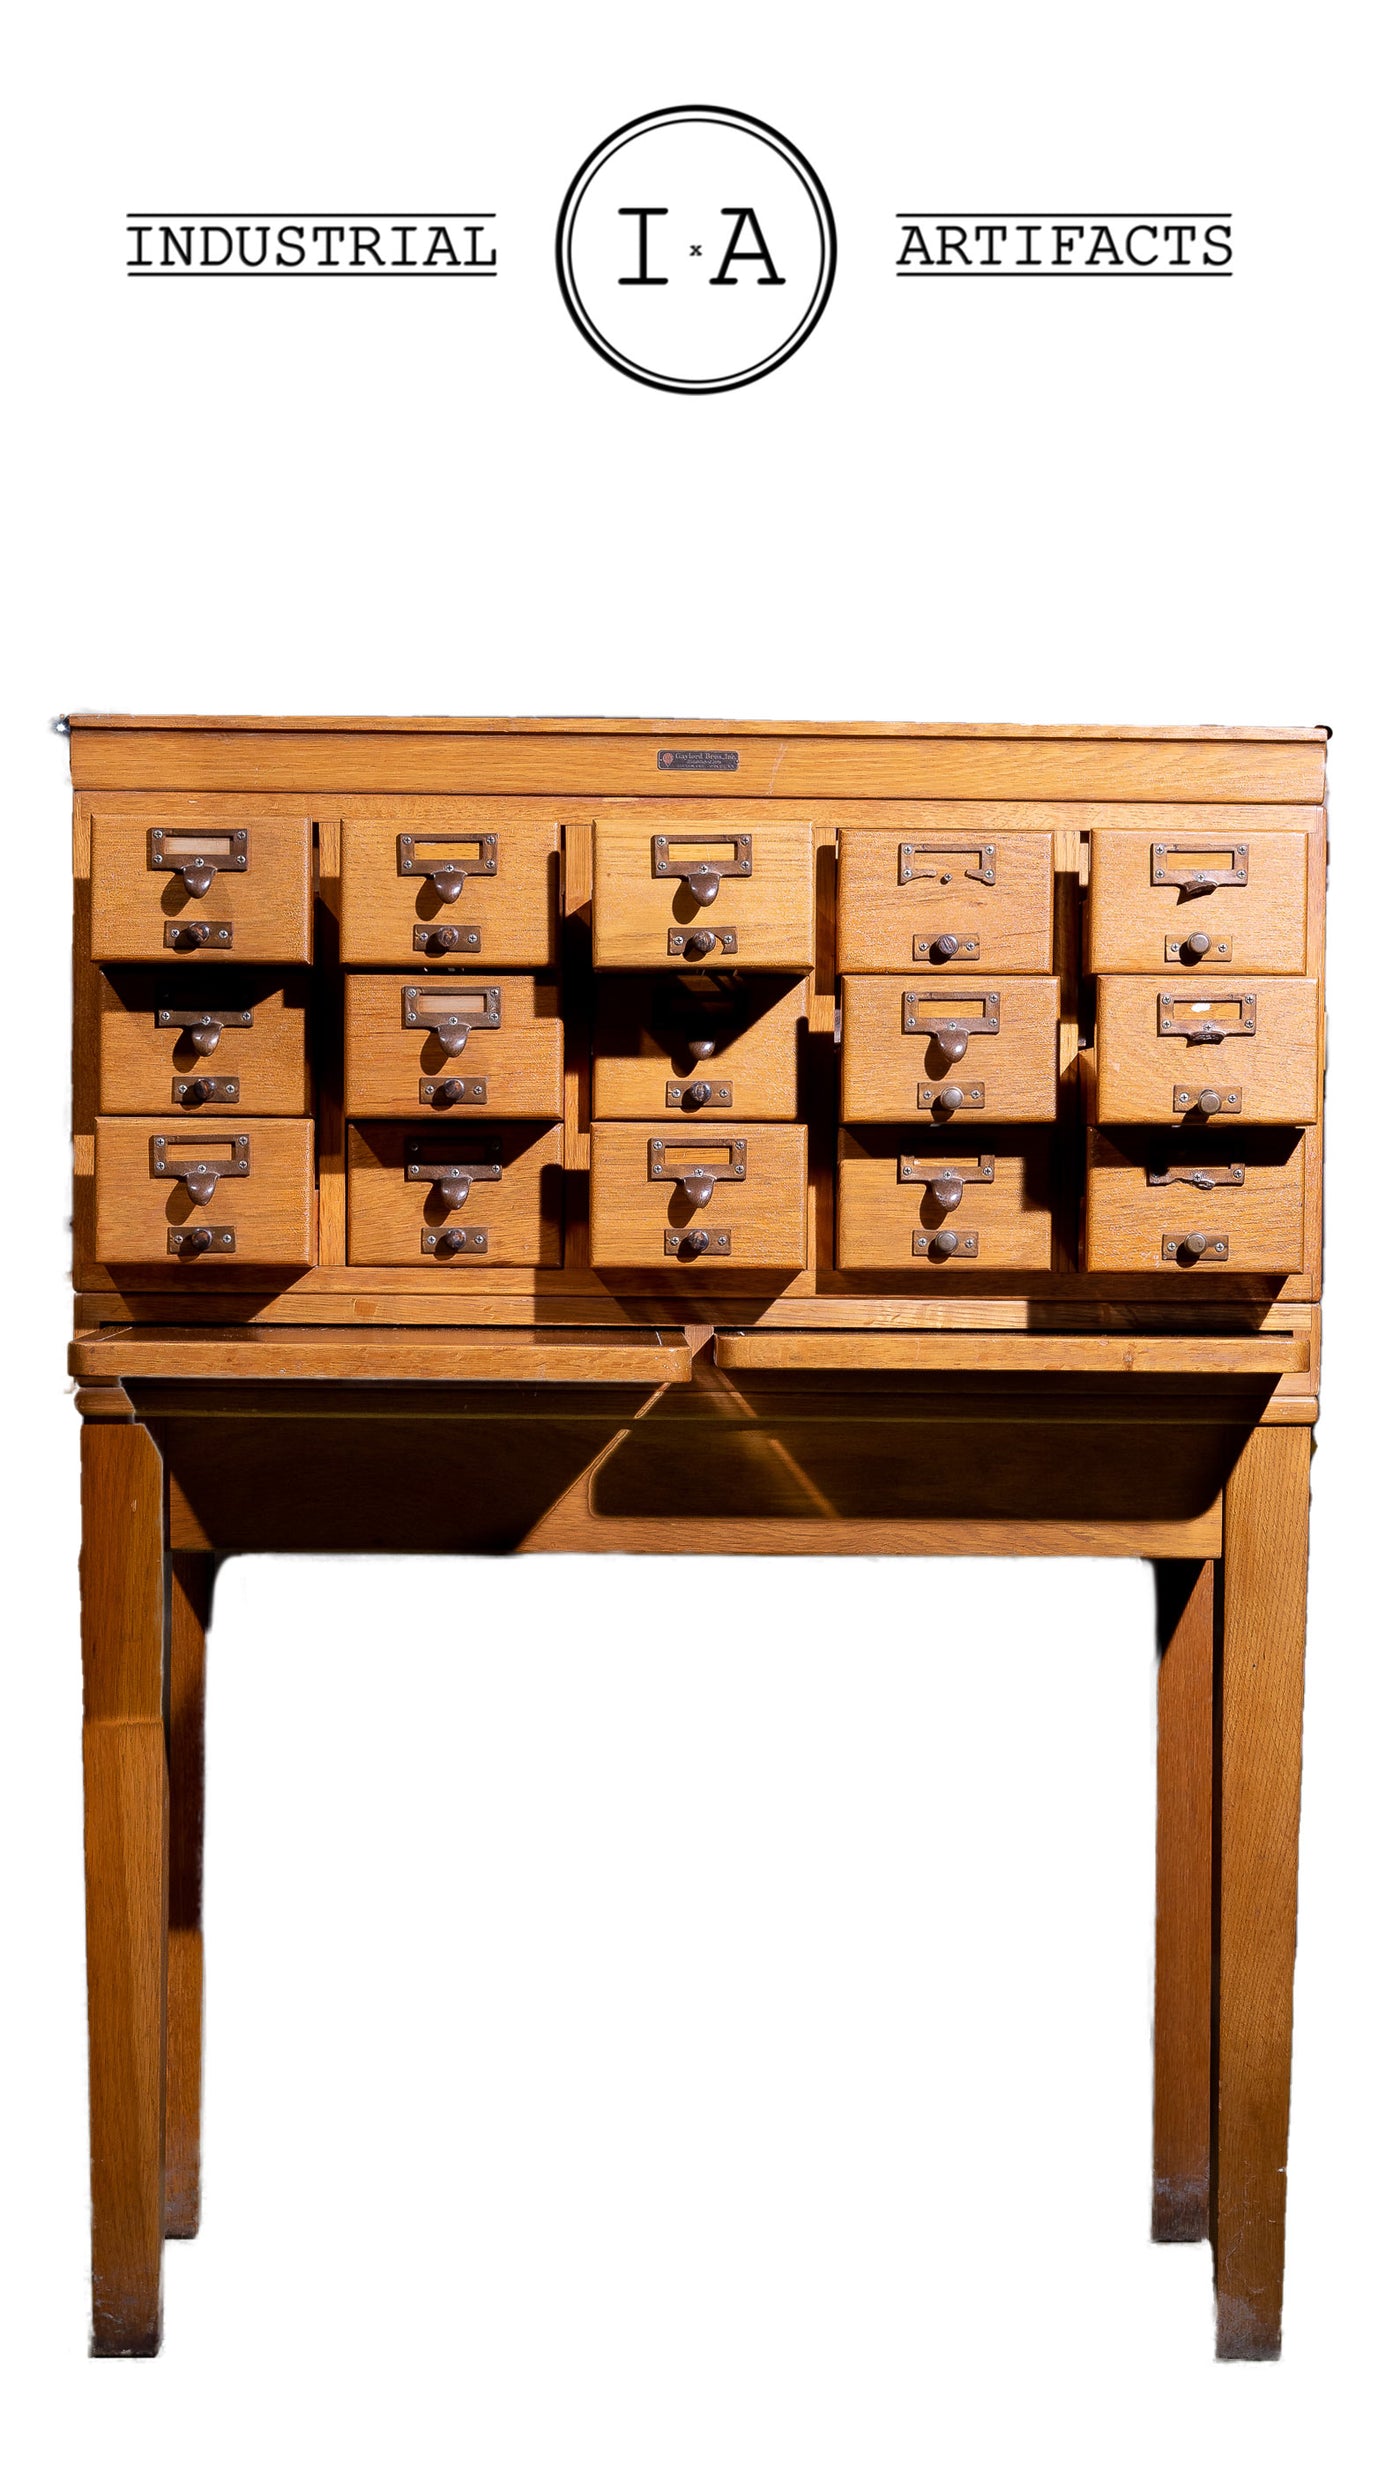 Antique Standing Librarian Card Catalogue With Writing Desks By Gaylord Bros.